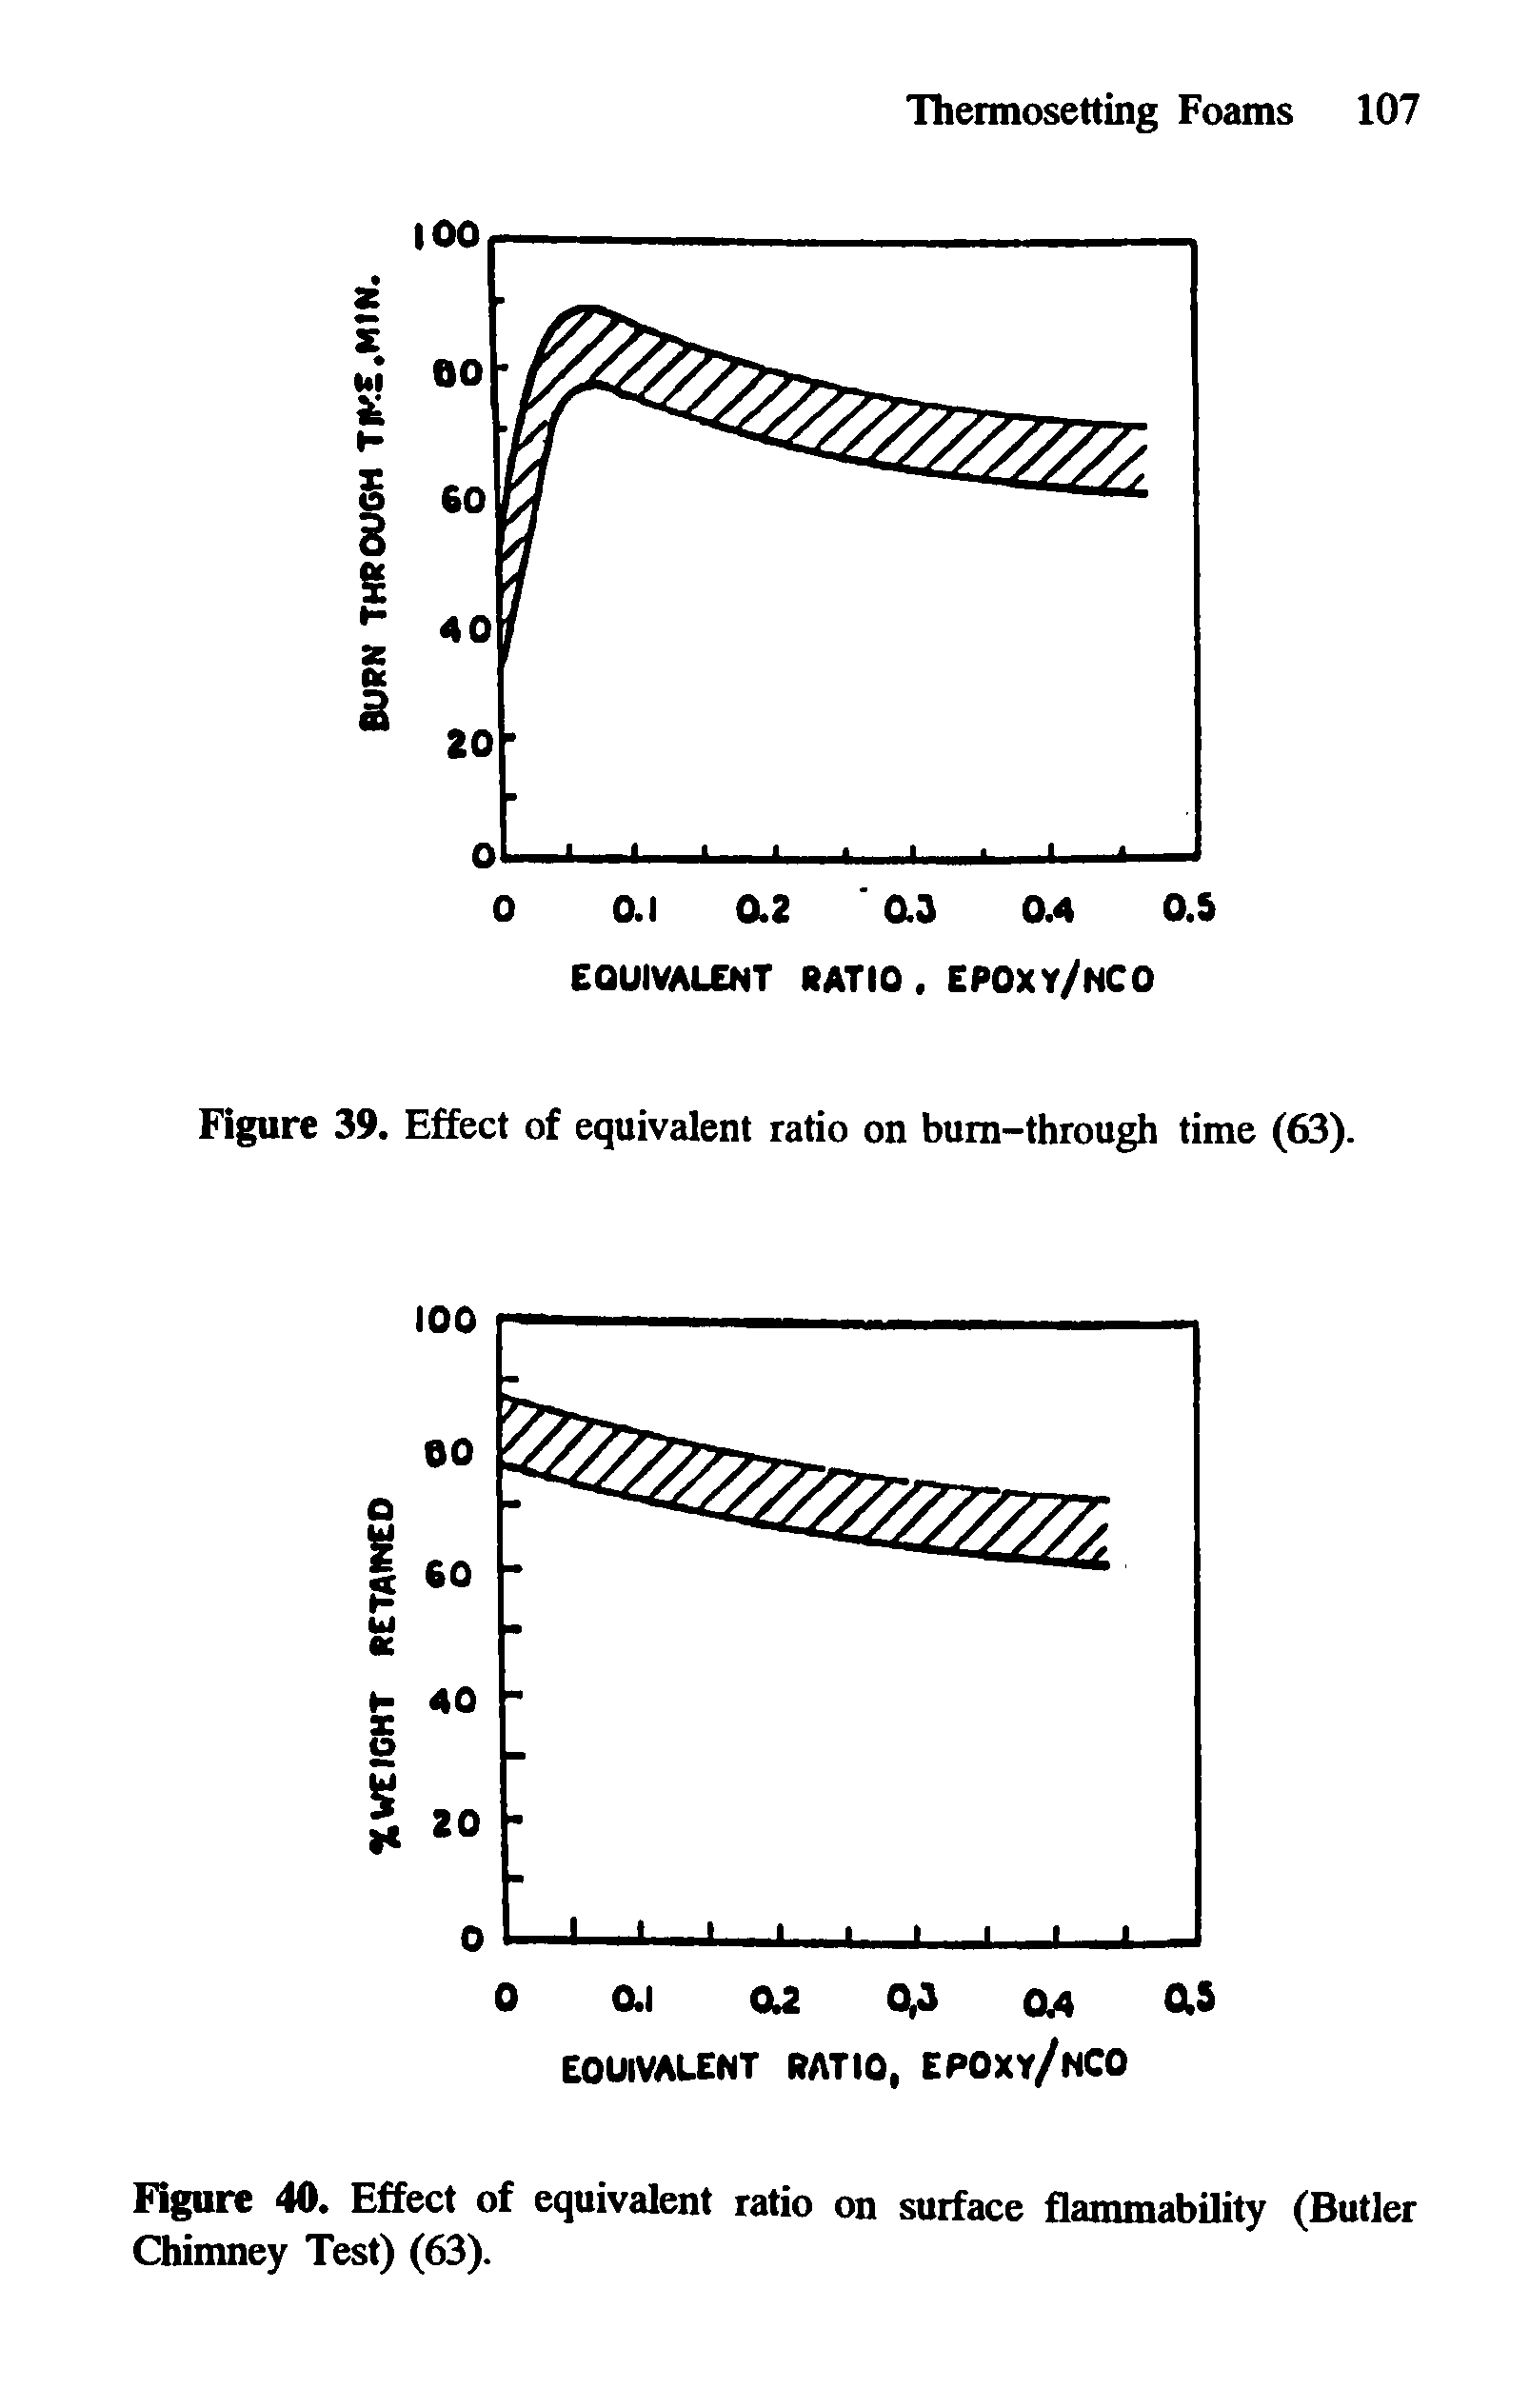 Figure 39. Effect of equivalent ratio on bum-through time (63).